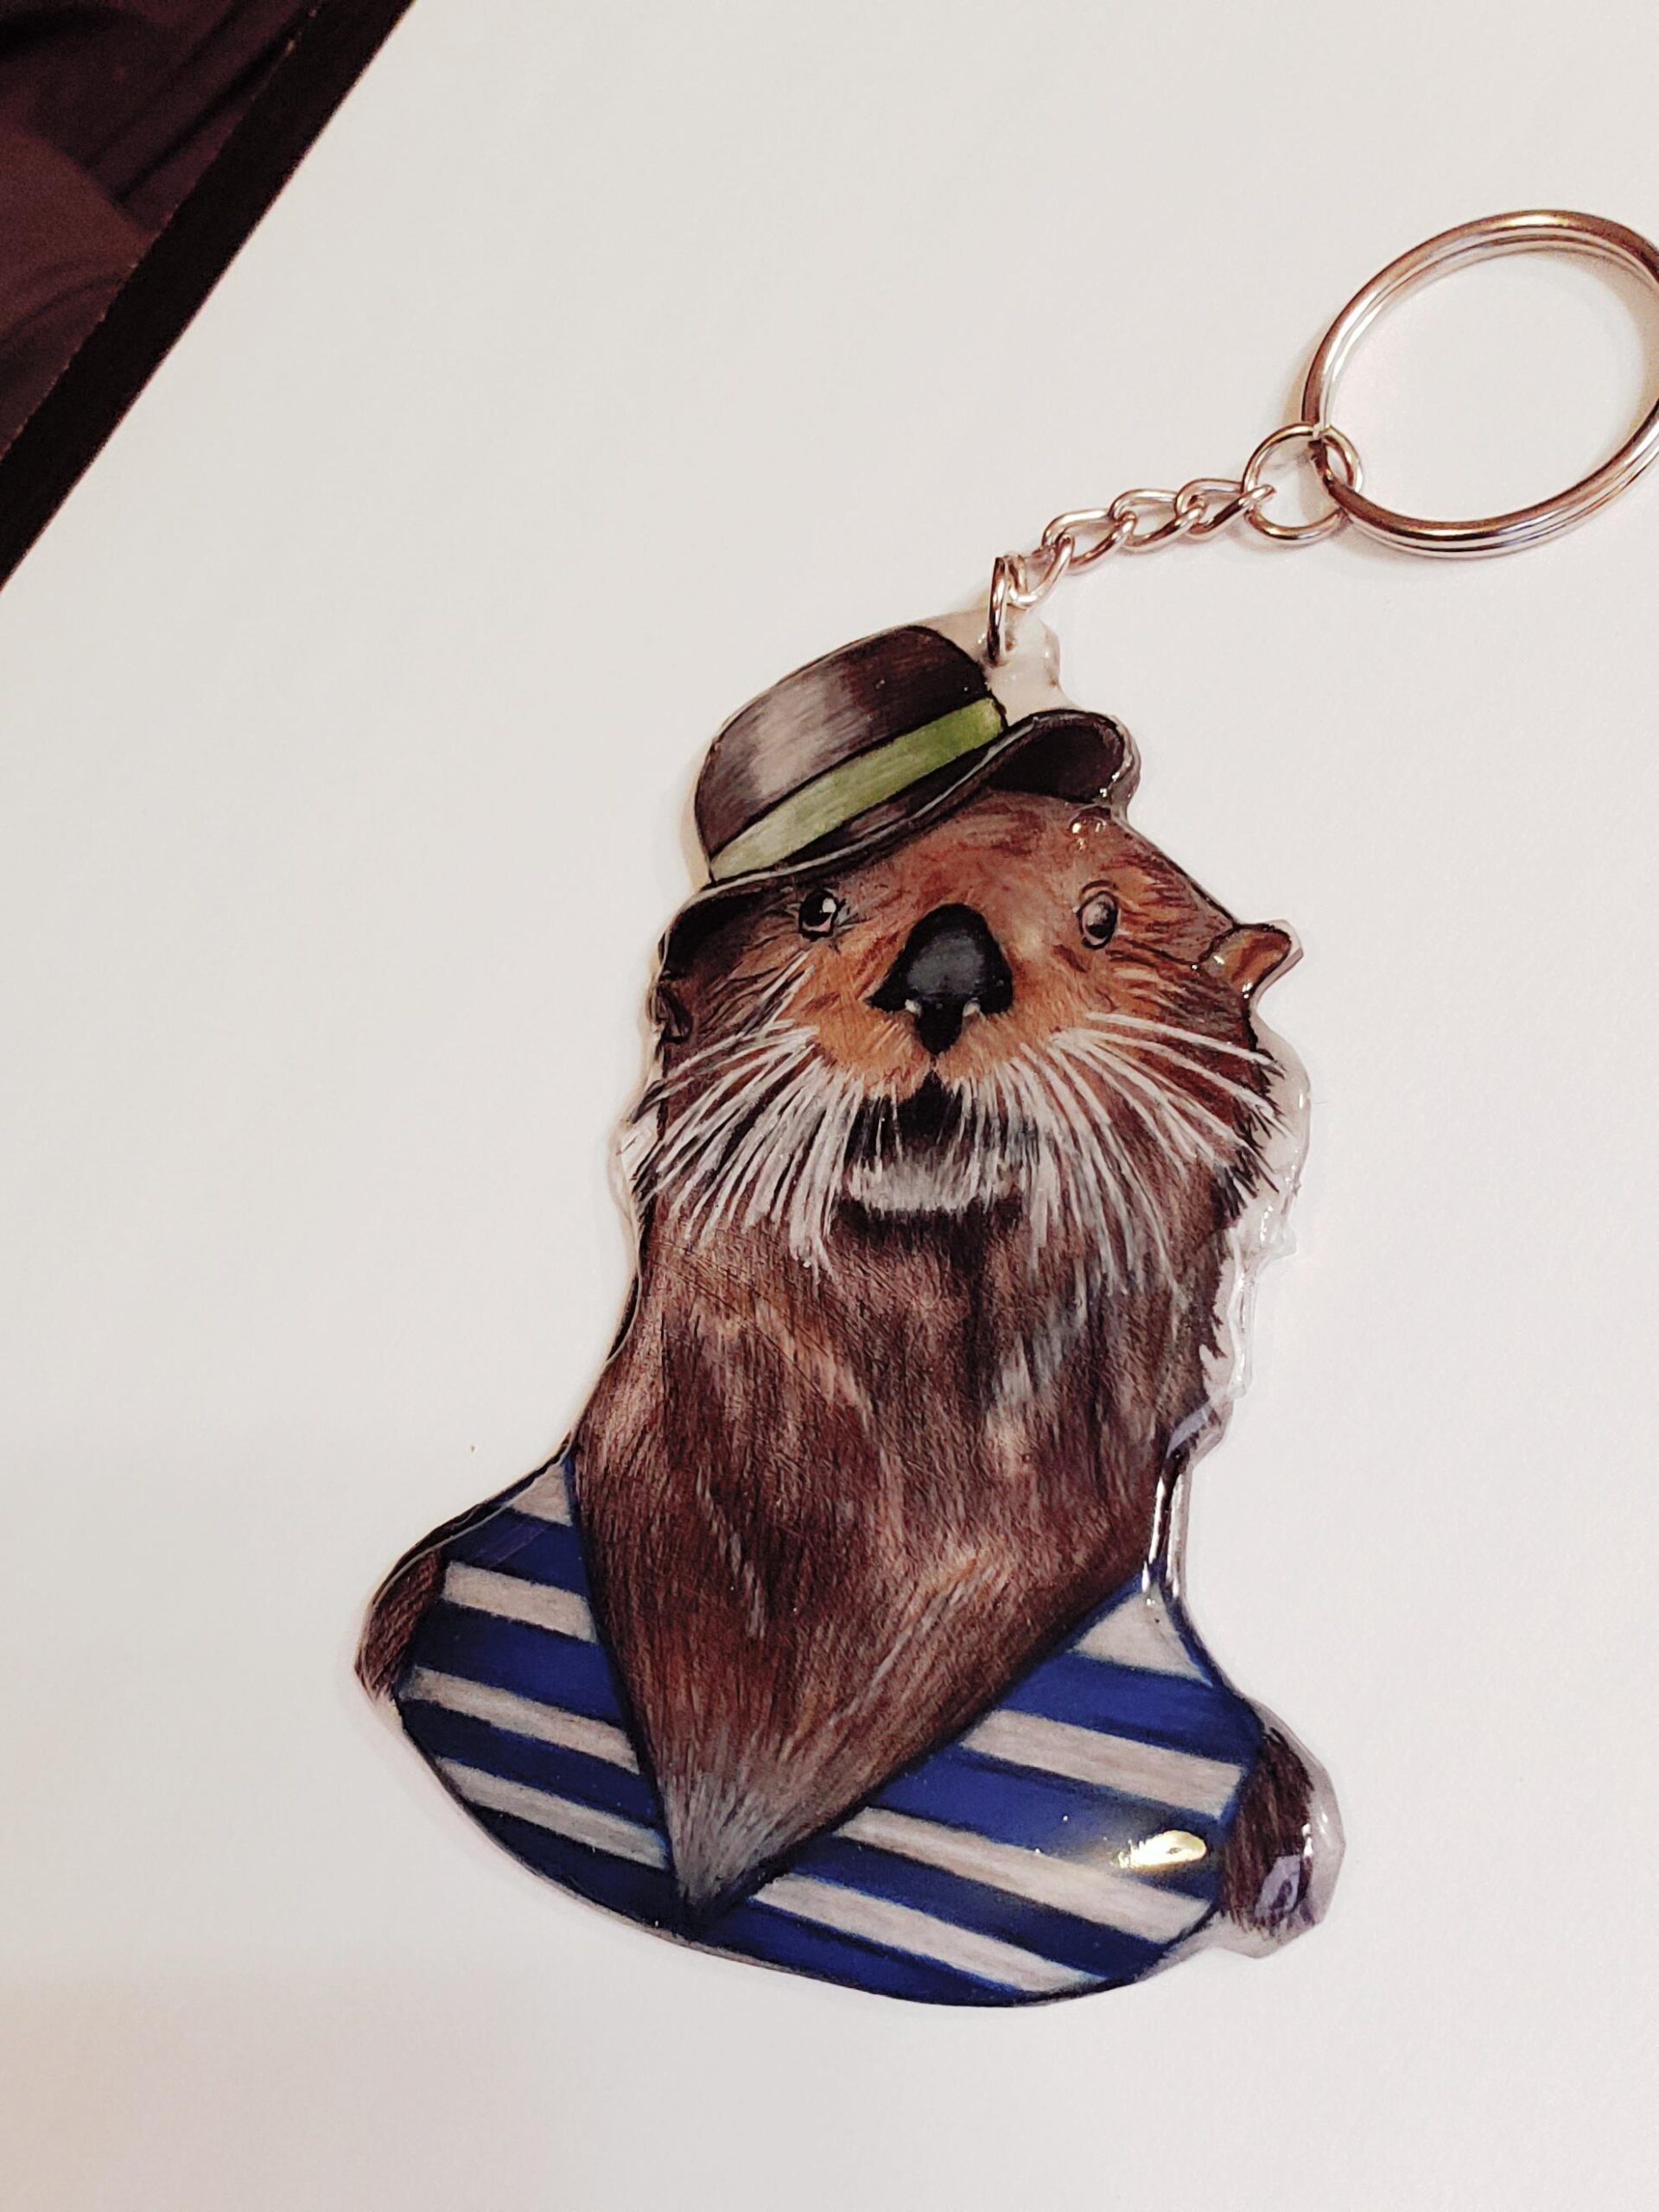 I made an otter in a swimsuit Keychain (that is the accomplished product)